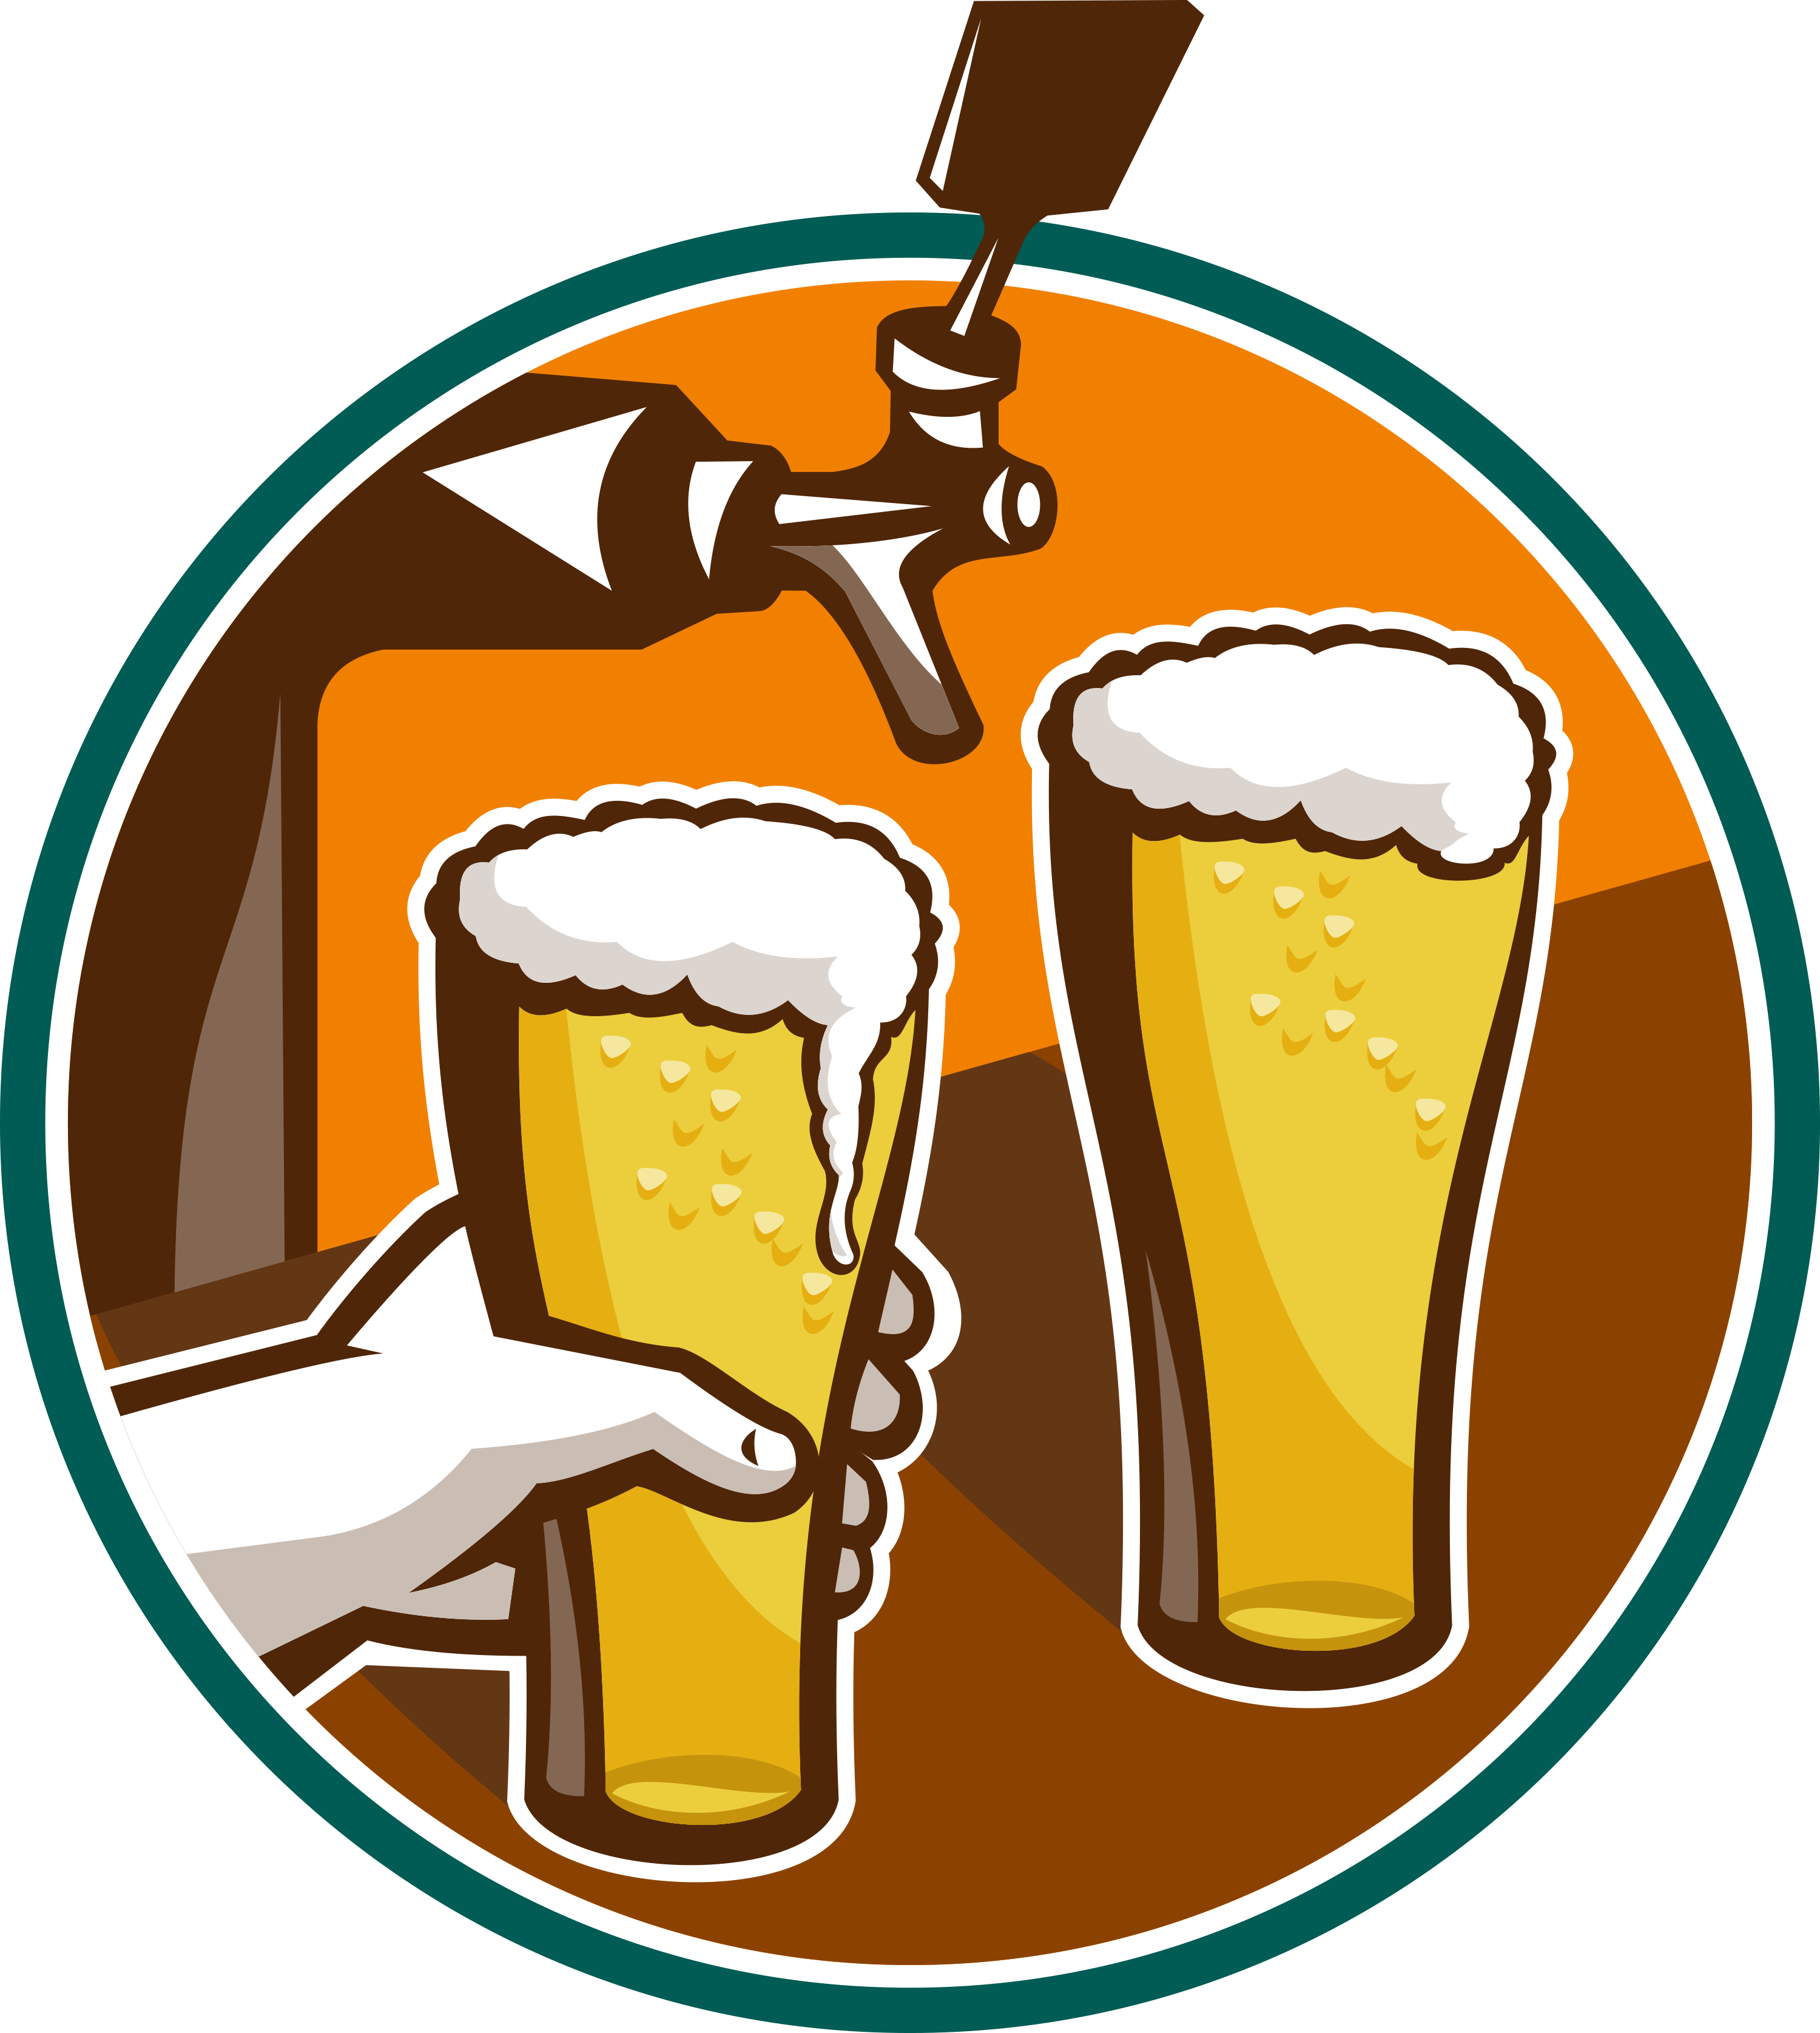 San diego craft brewery. Drinking clipart draft beer